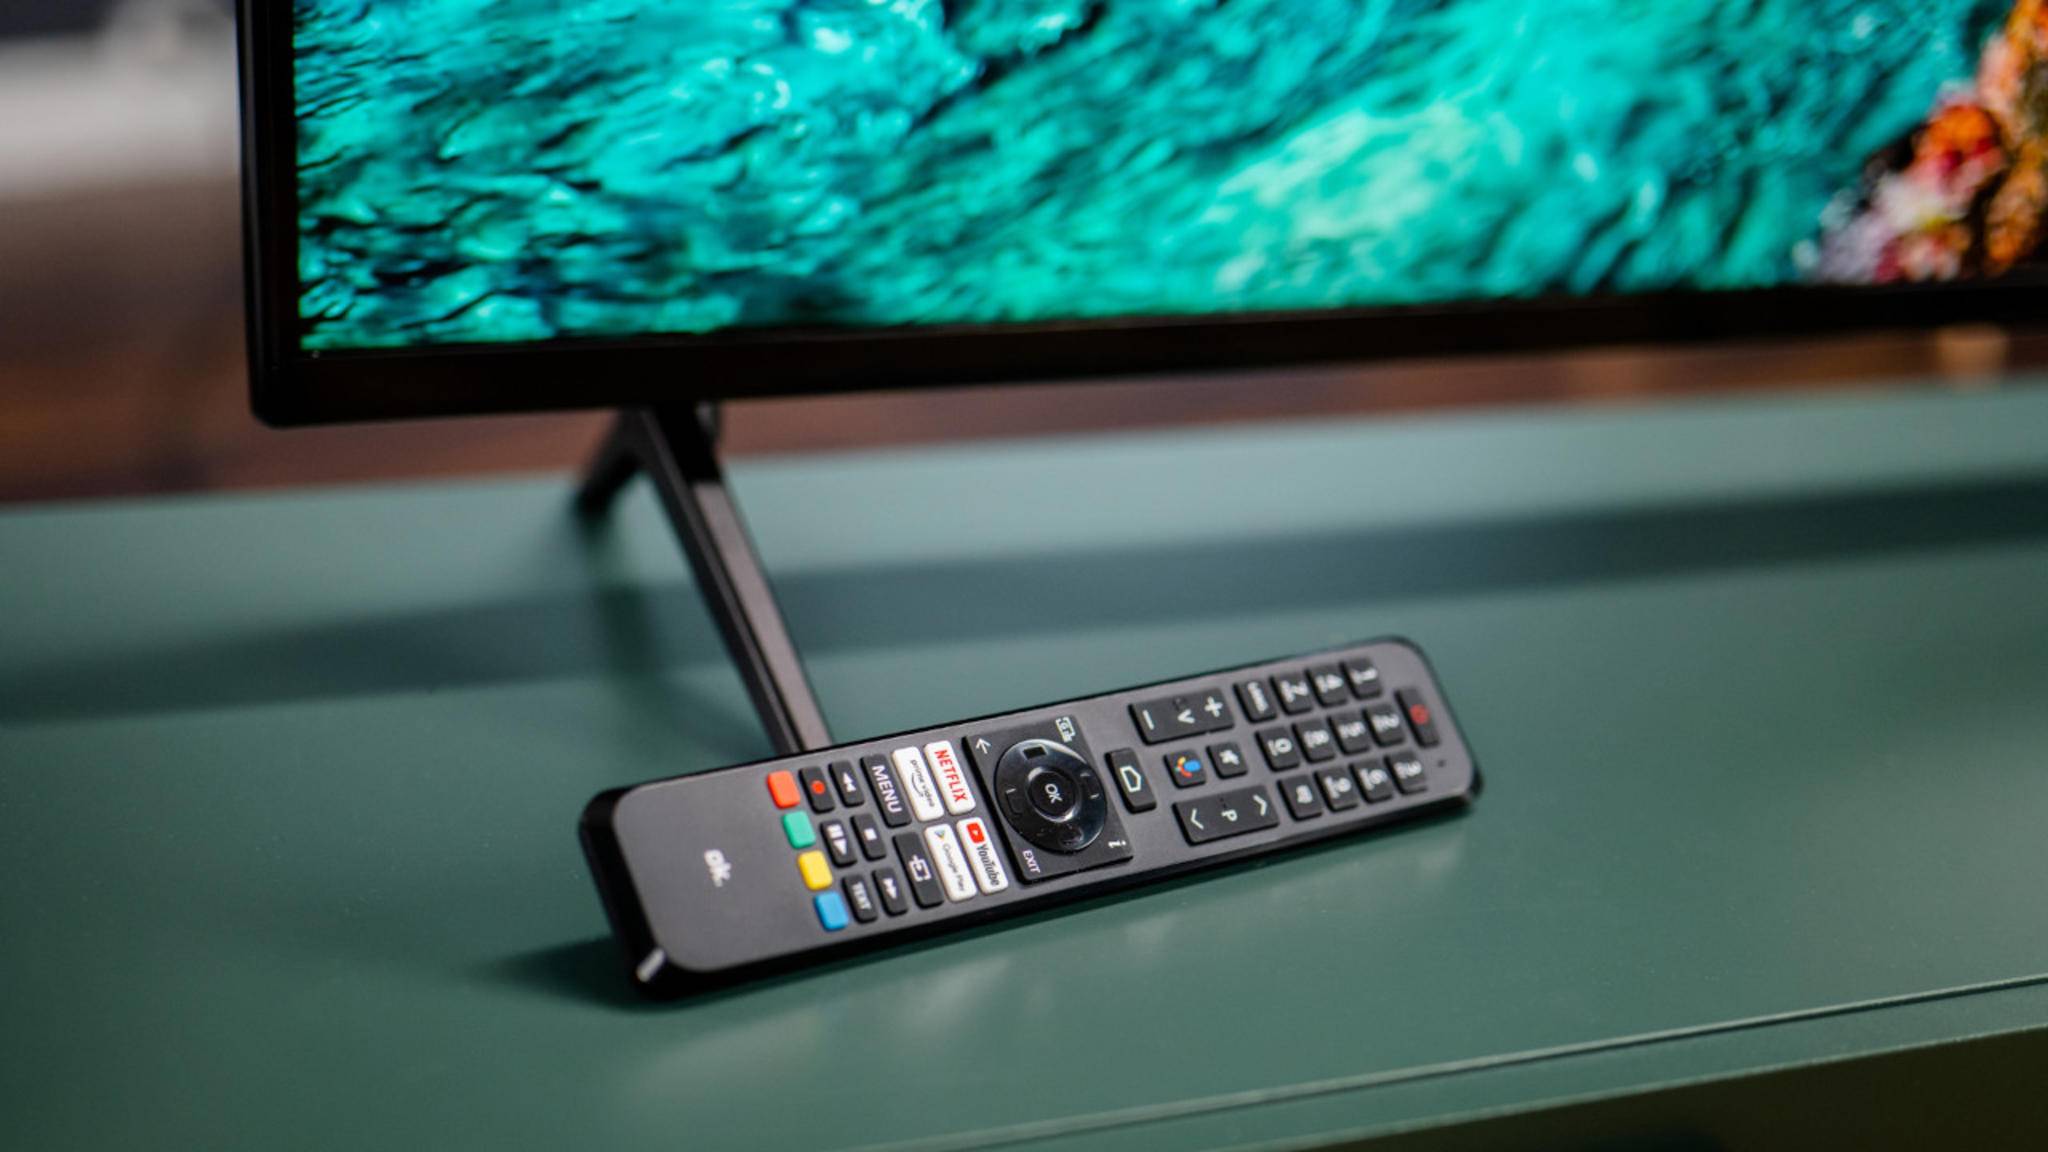 Remote control leaning on the base of a TV.